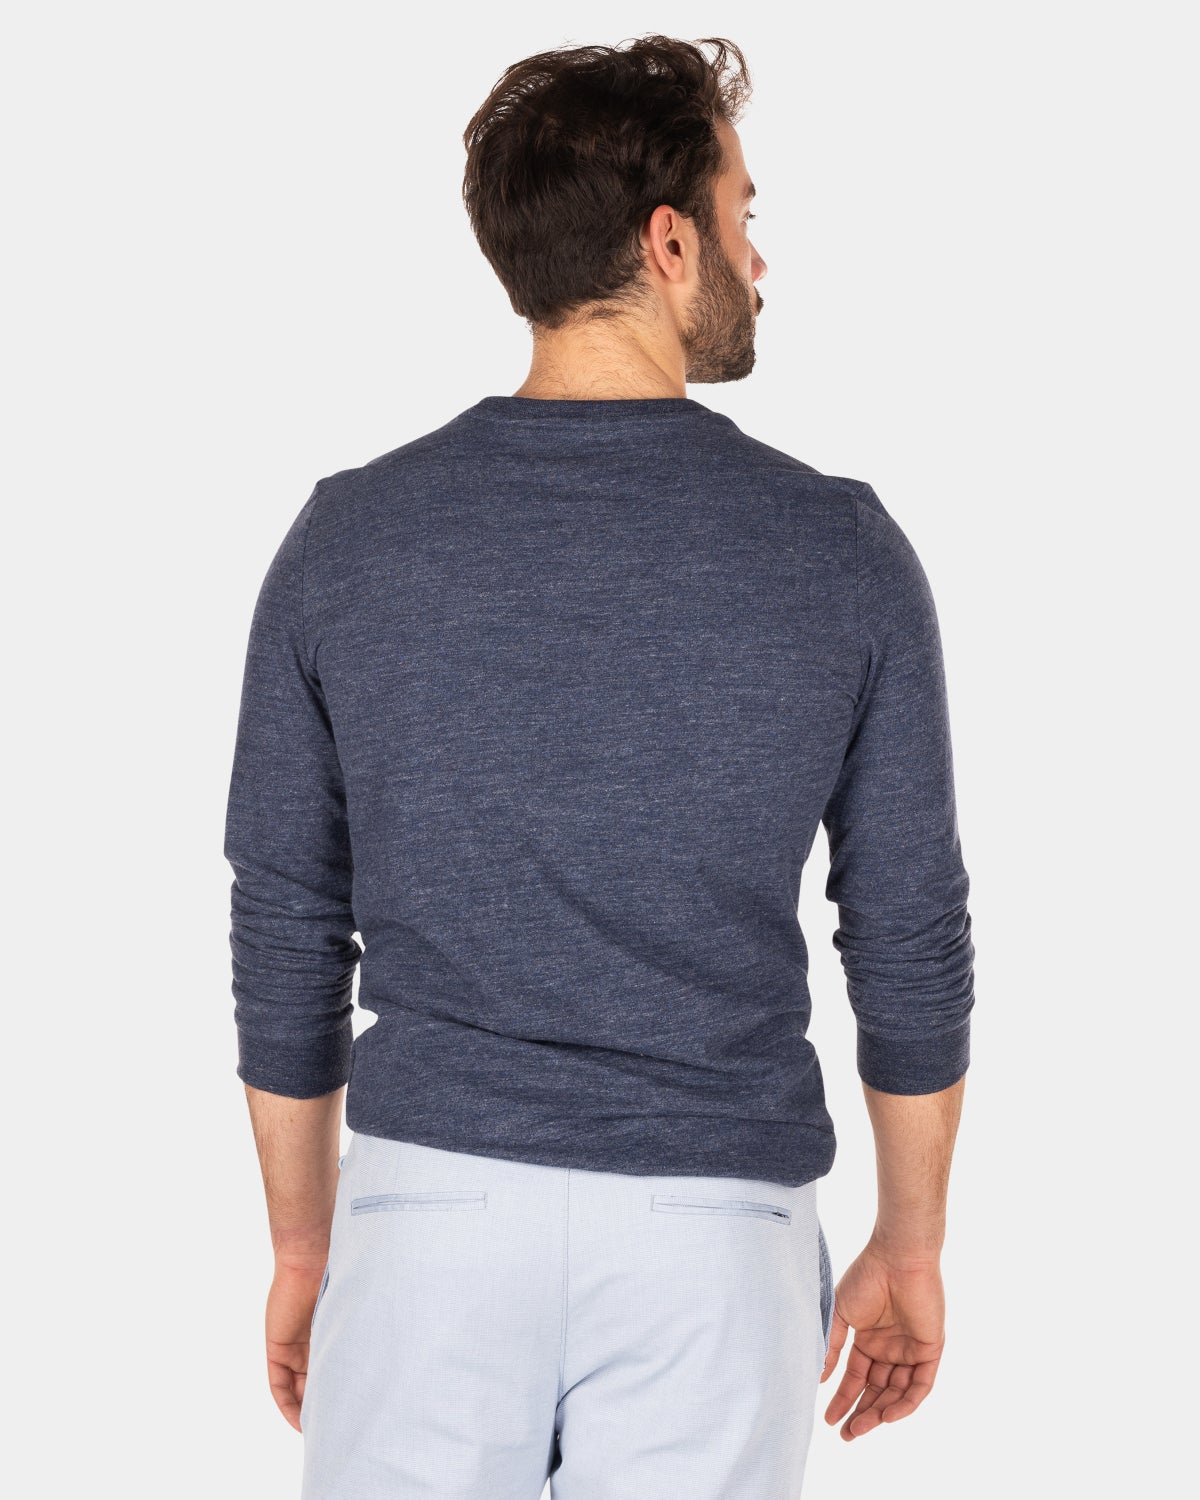 Crew neck long sleeved t-shirt - Traditional Navy